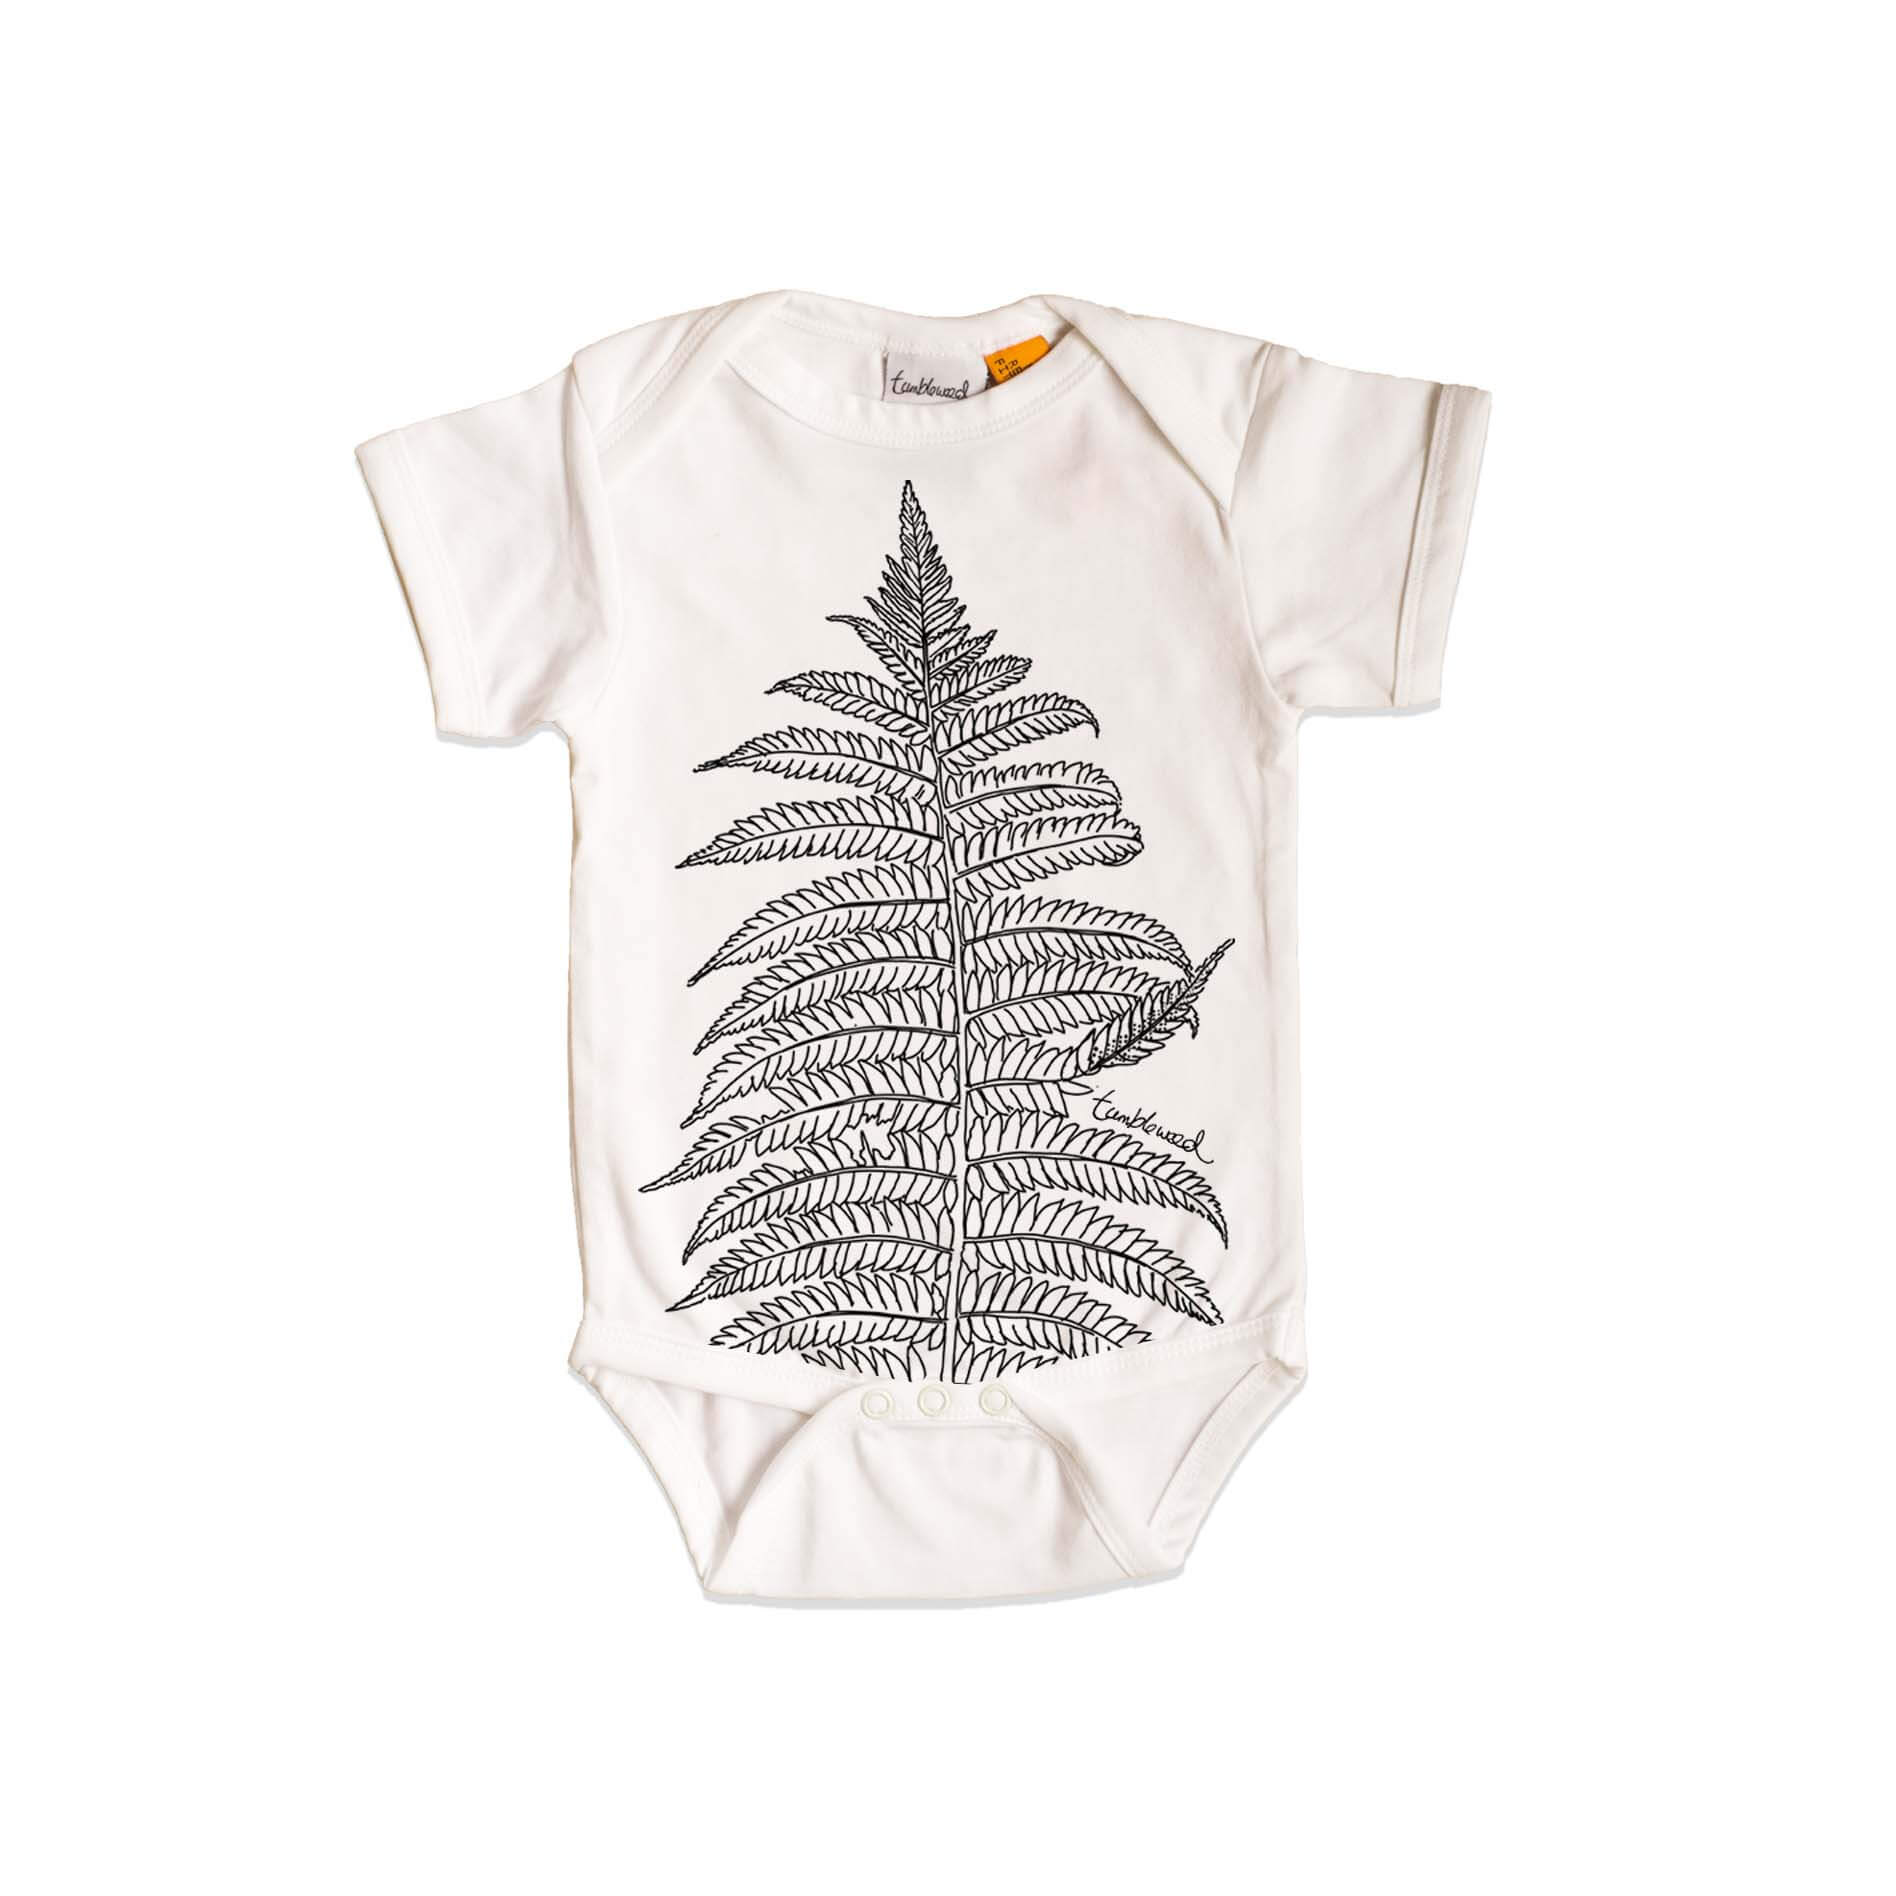 Short sleeved, white, organic cotton, baby onesie featuring a screen printed Silver fern/ponga design.